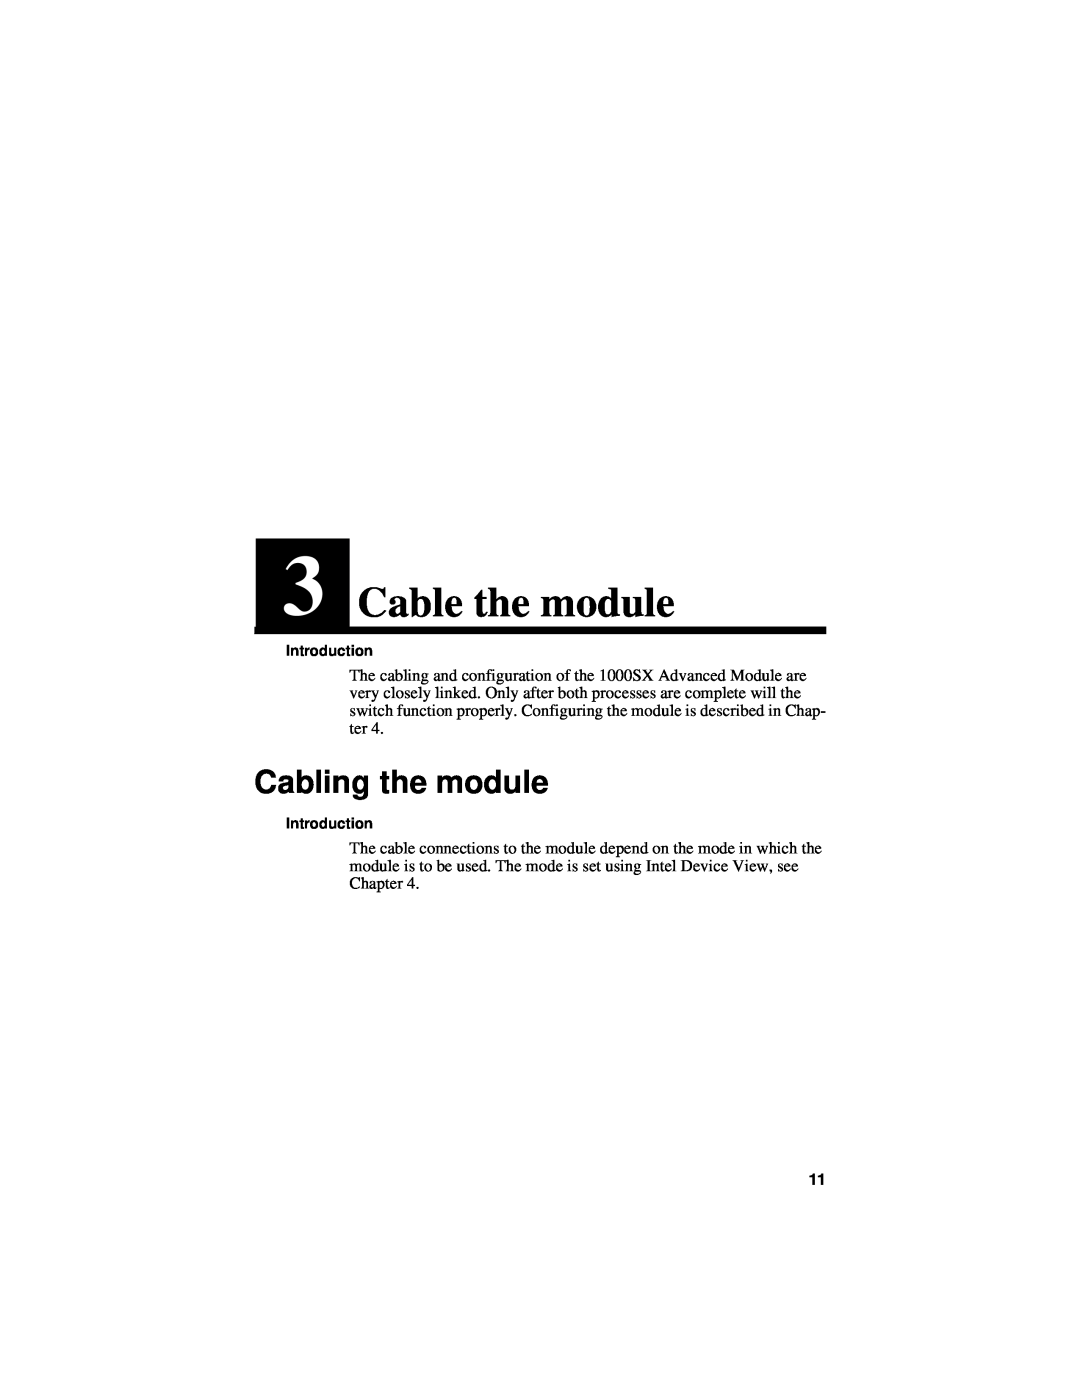 Intel 1000SX manual Cable the module, Cabling the module 